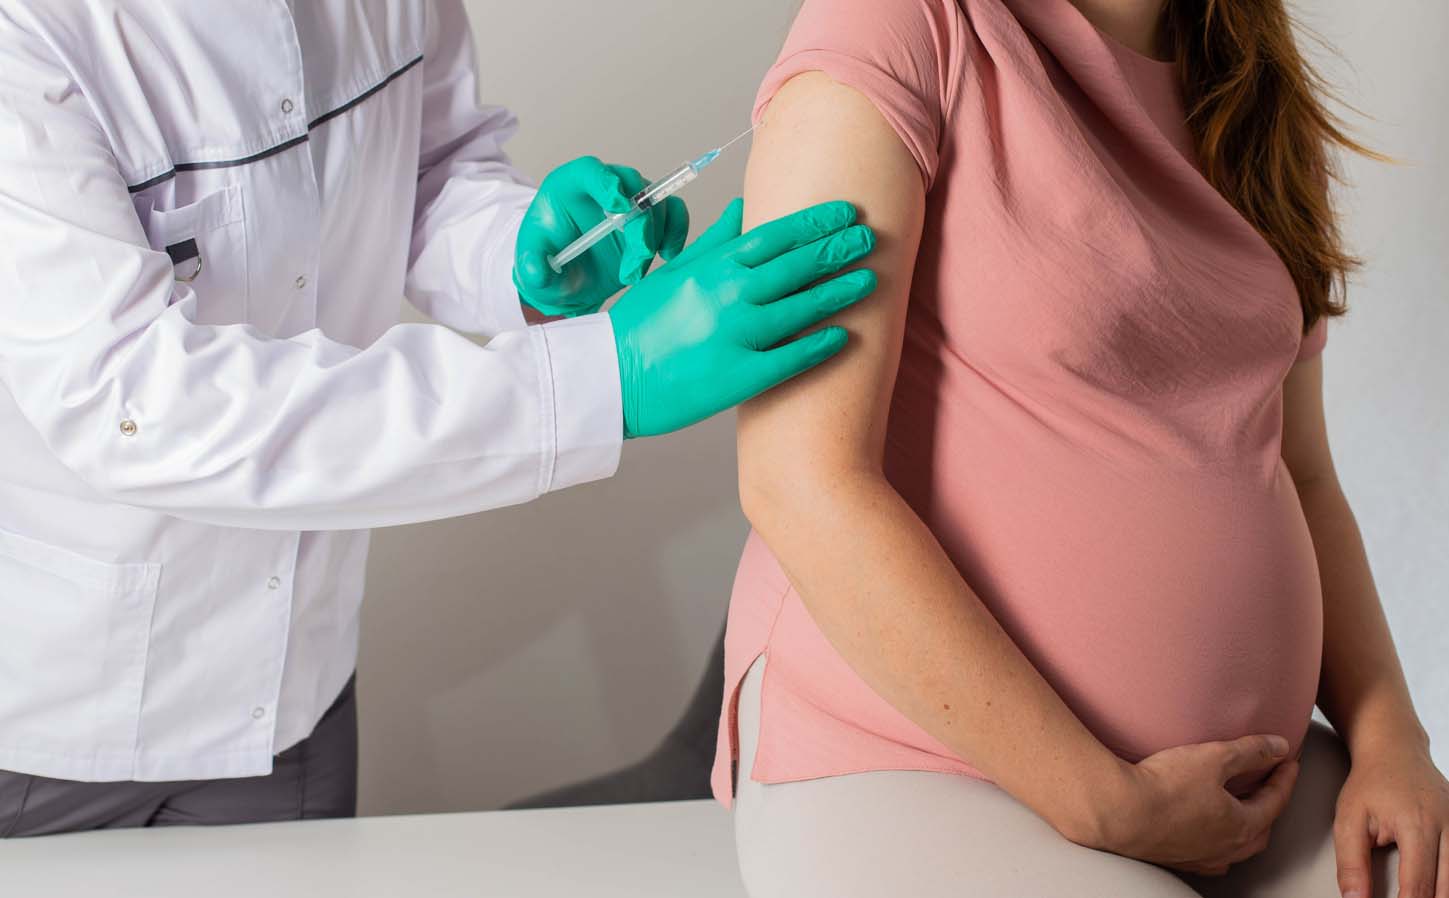 Myths and Misconceptions of COVID-19 vaccine: Vaccination and Pregnancy